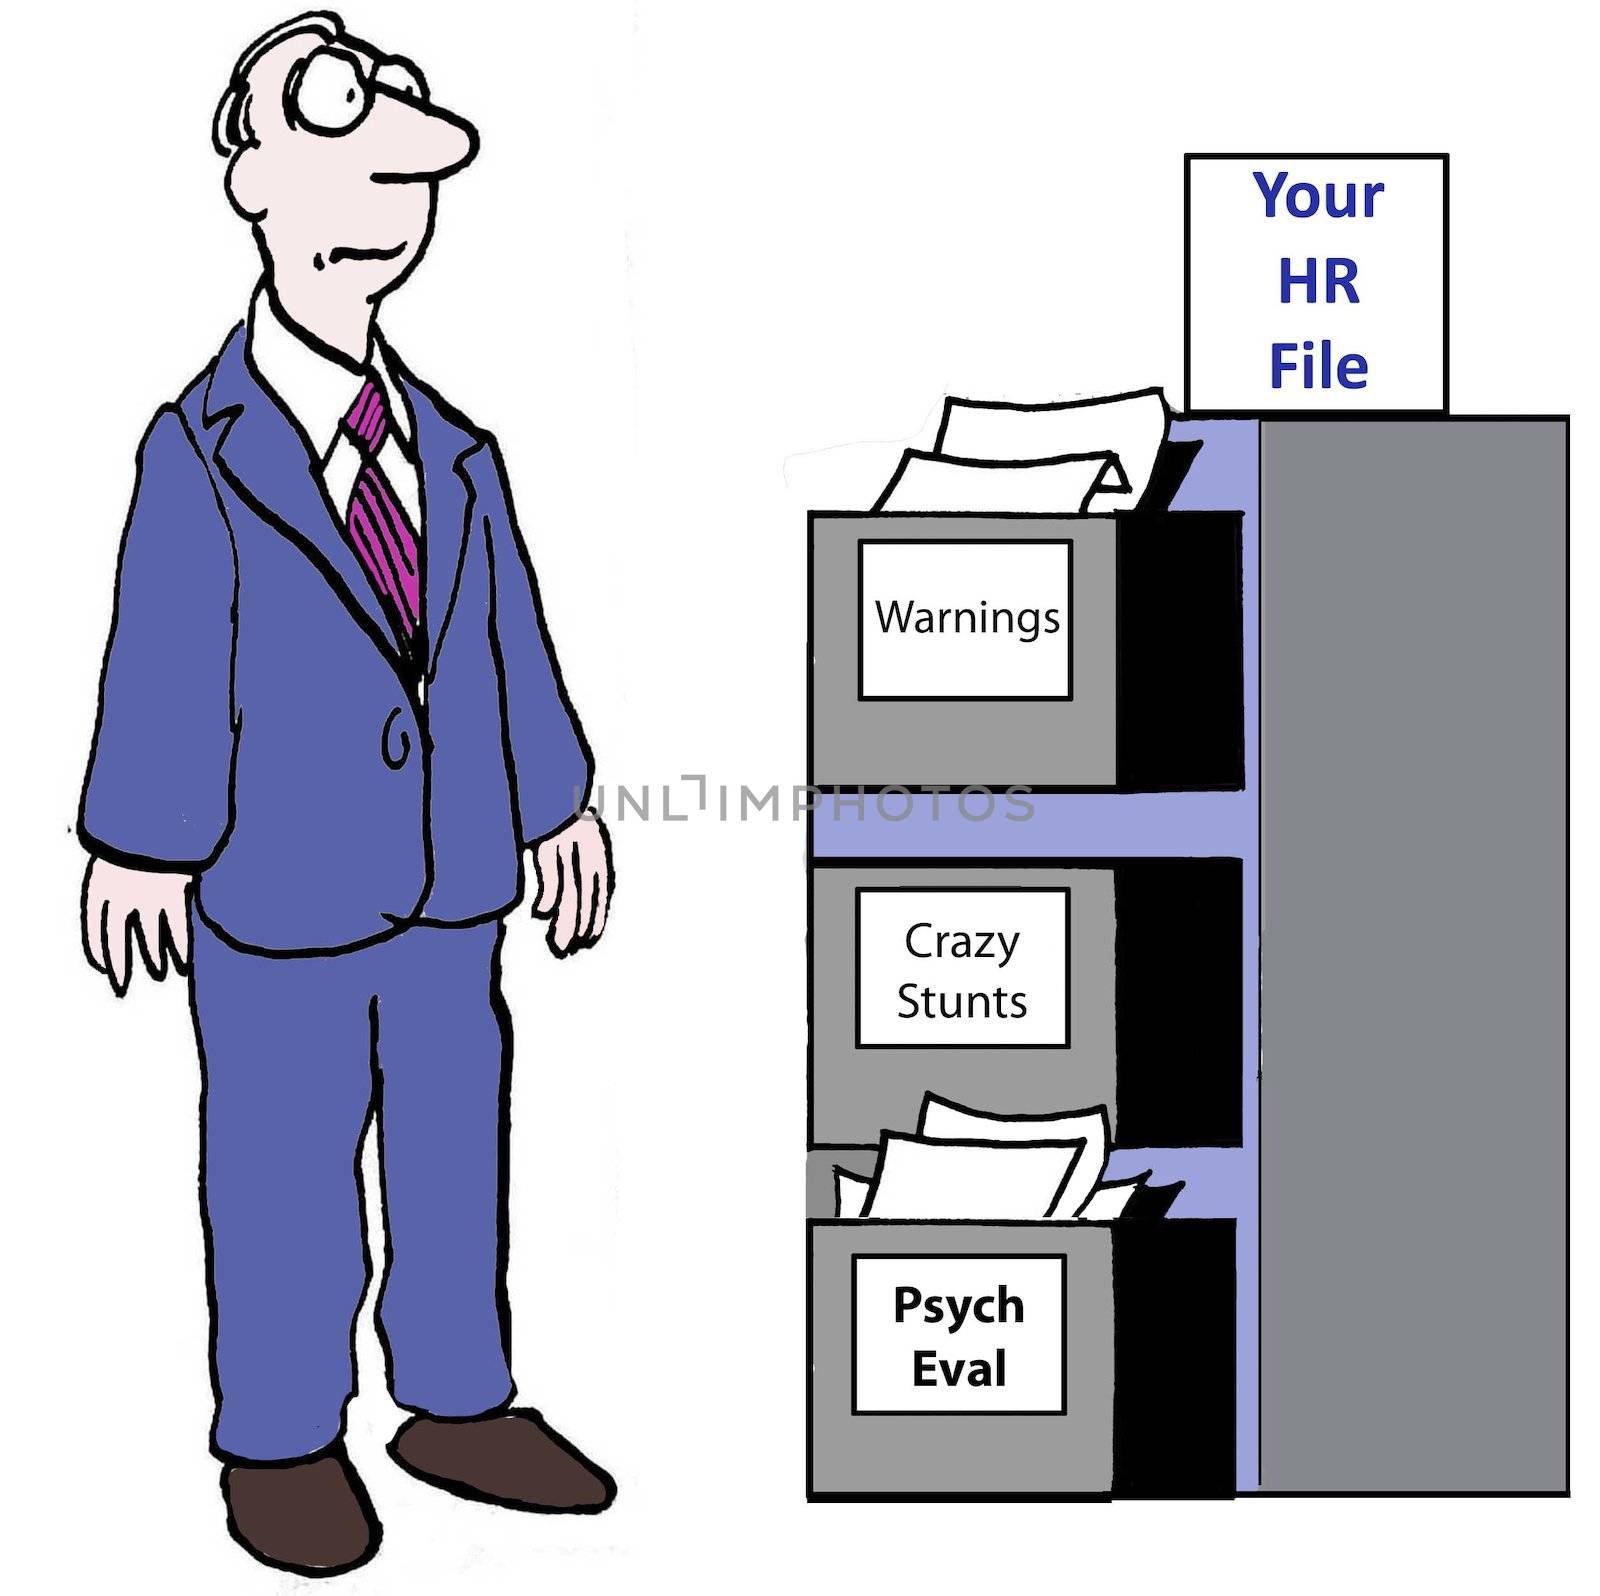 Your HR File:  Warnings, Crazy Stunts, Psych Eval